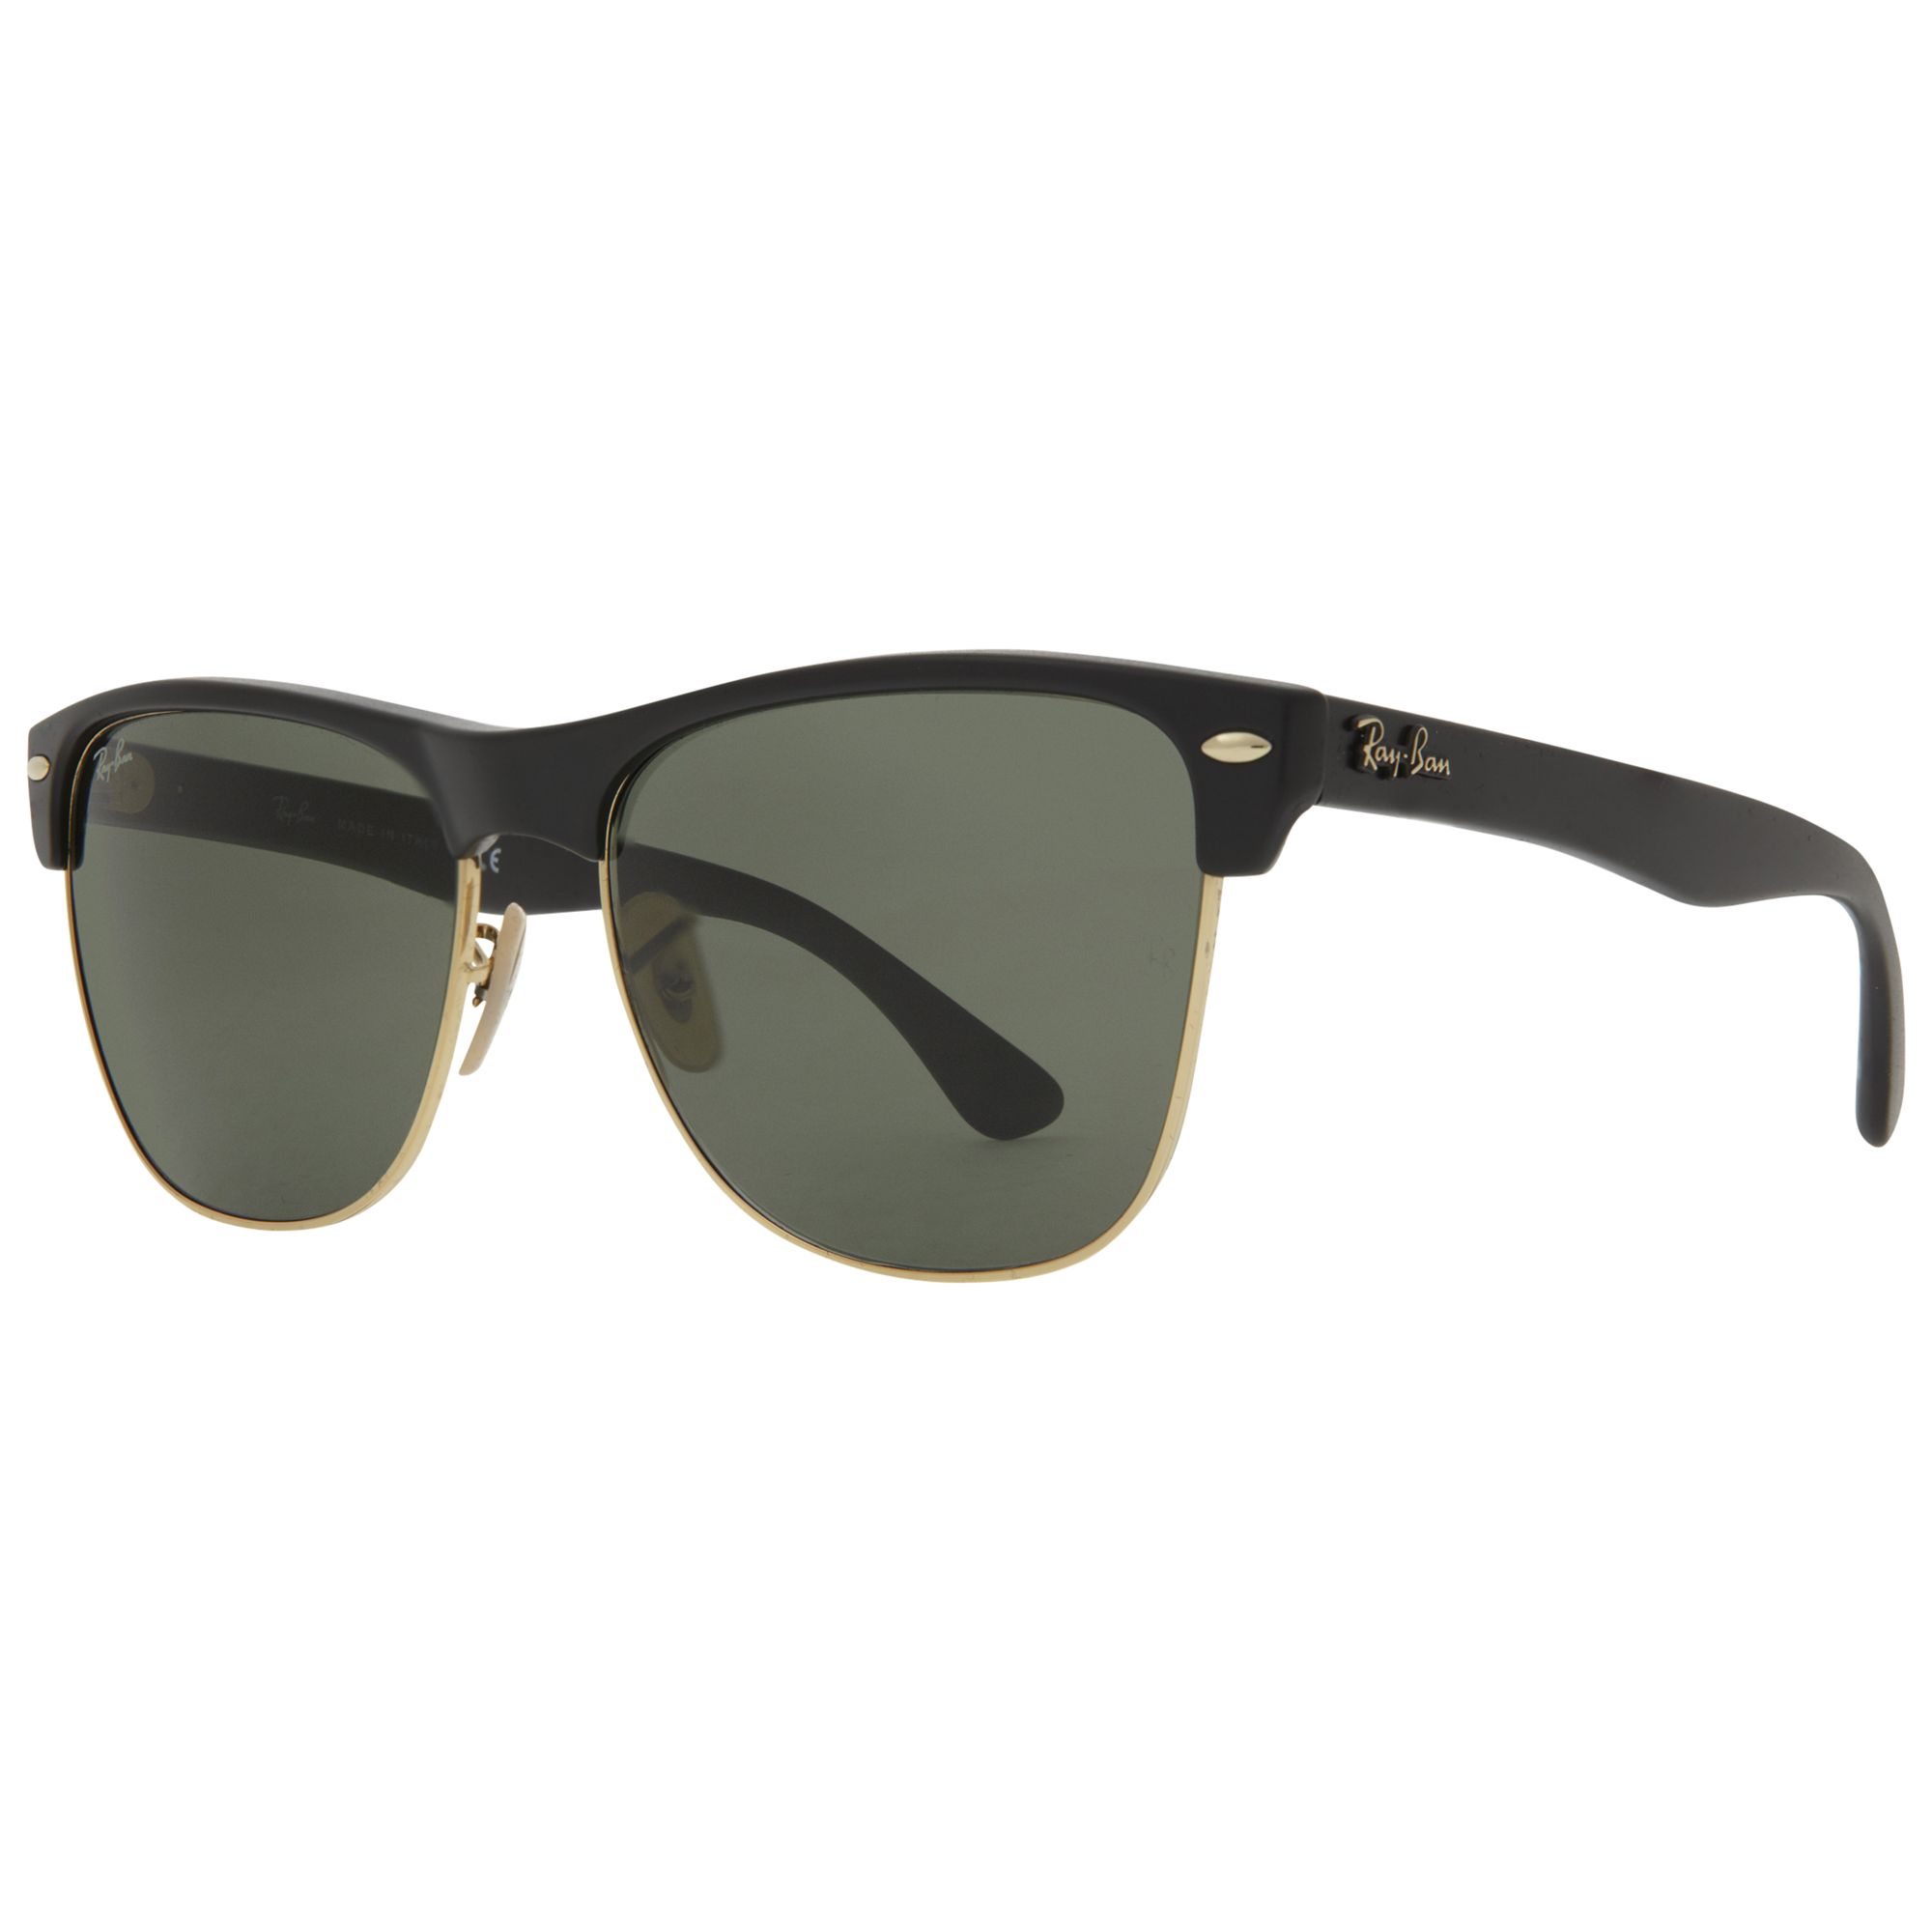 Ray-Ban RB4175 Oversized Clubmaster Sunglasses, Black